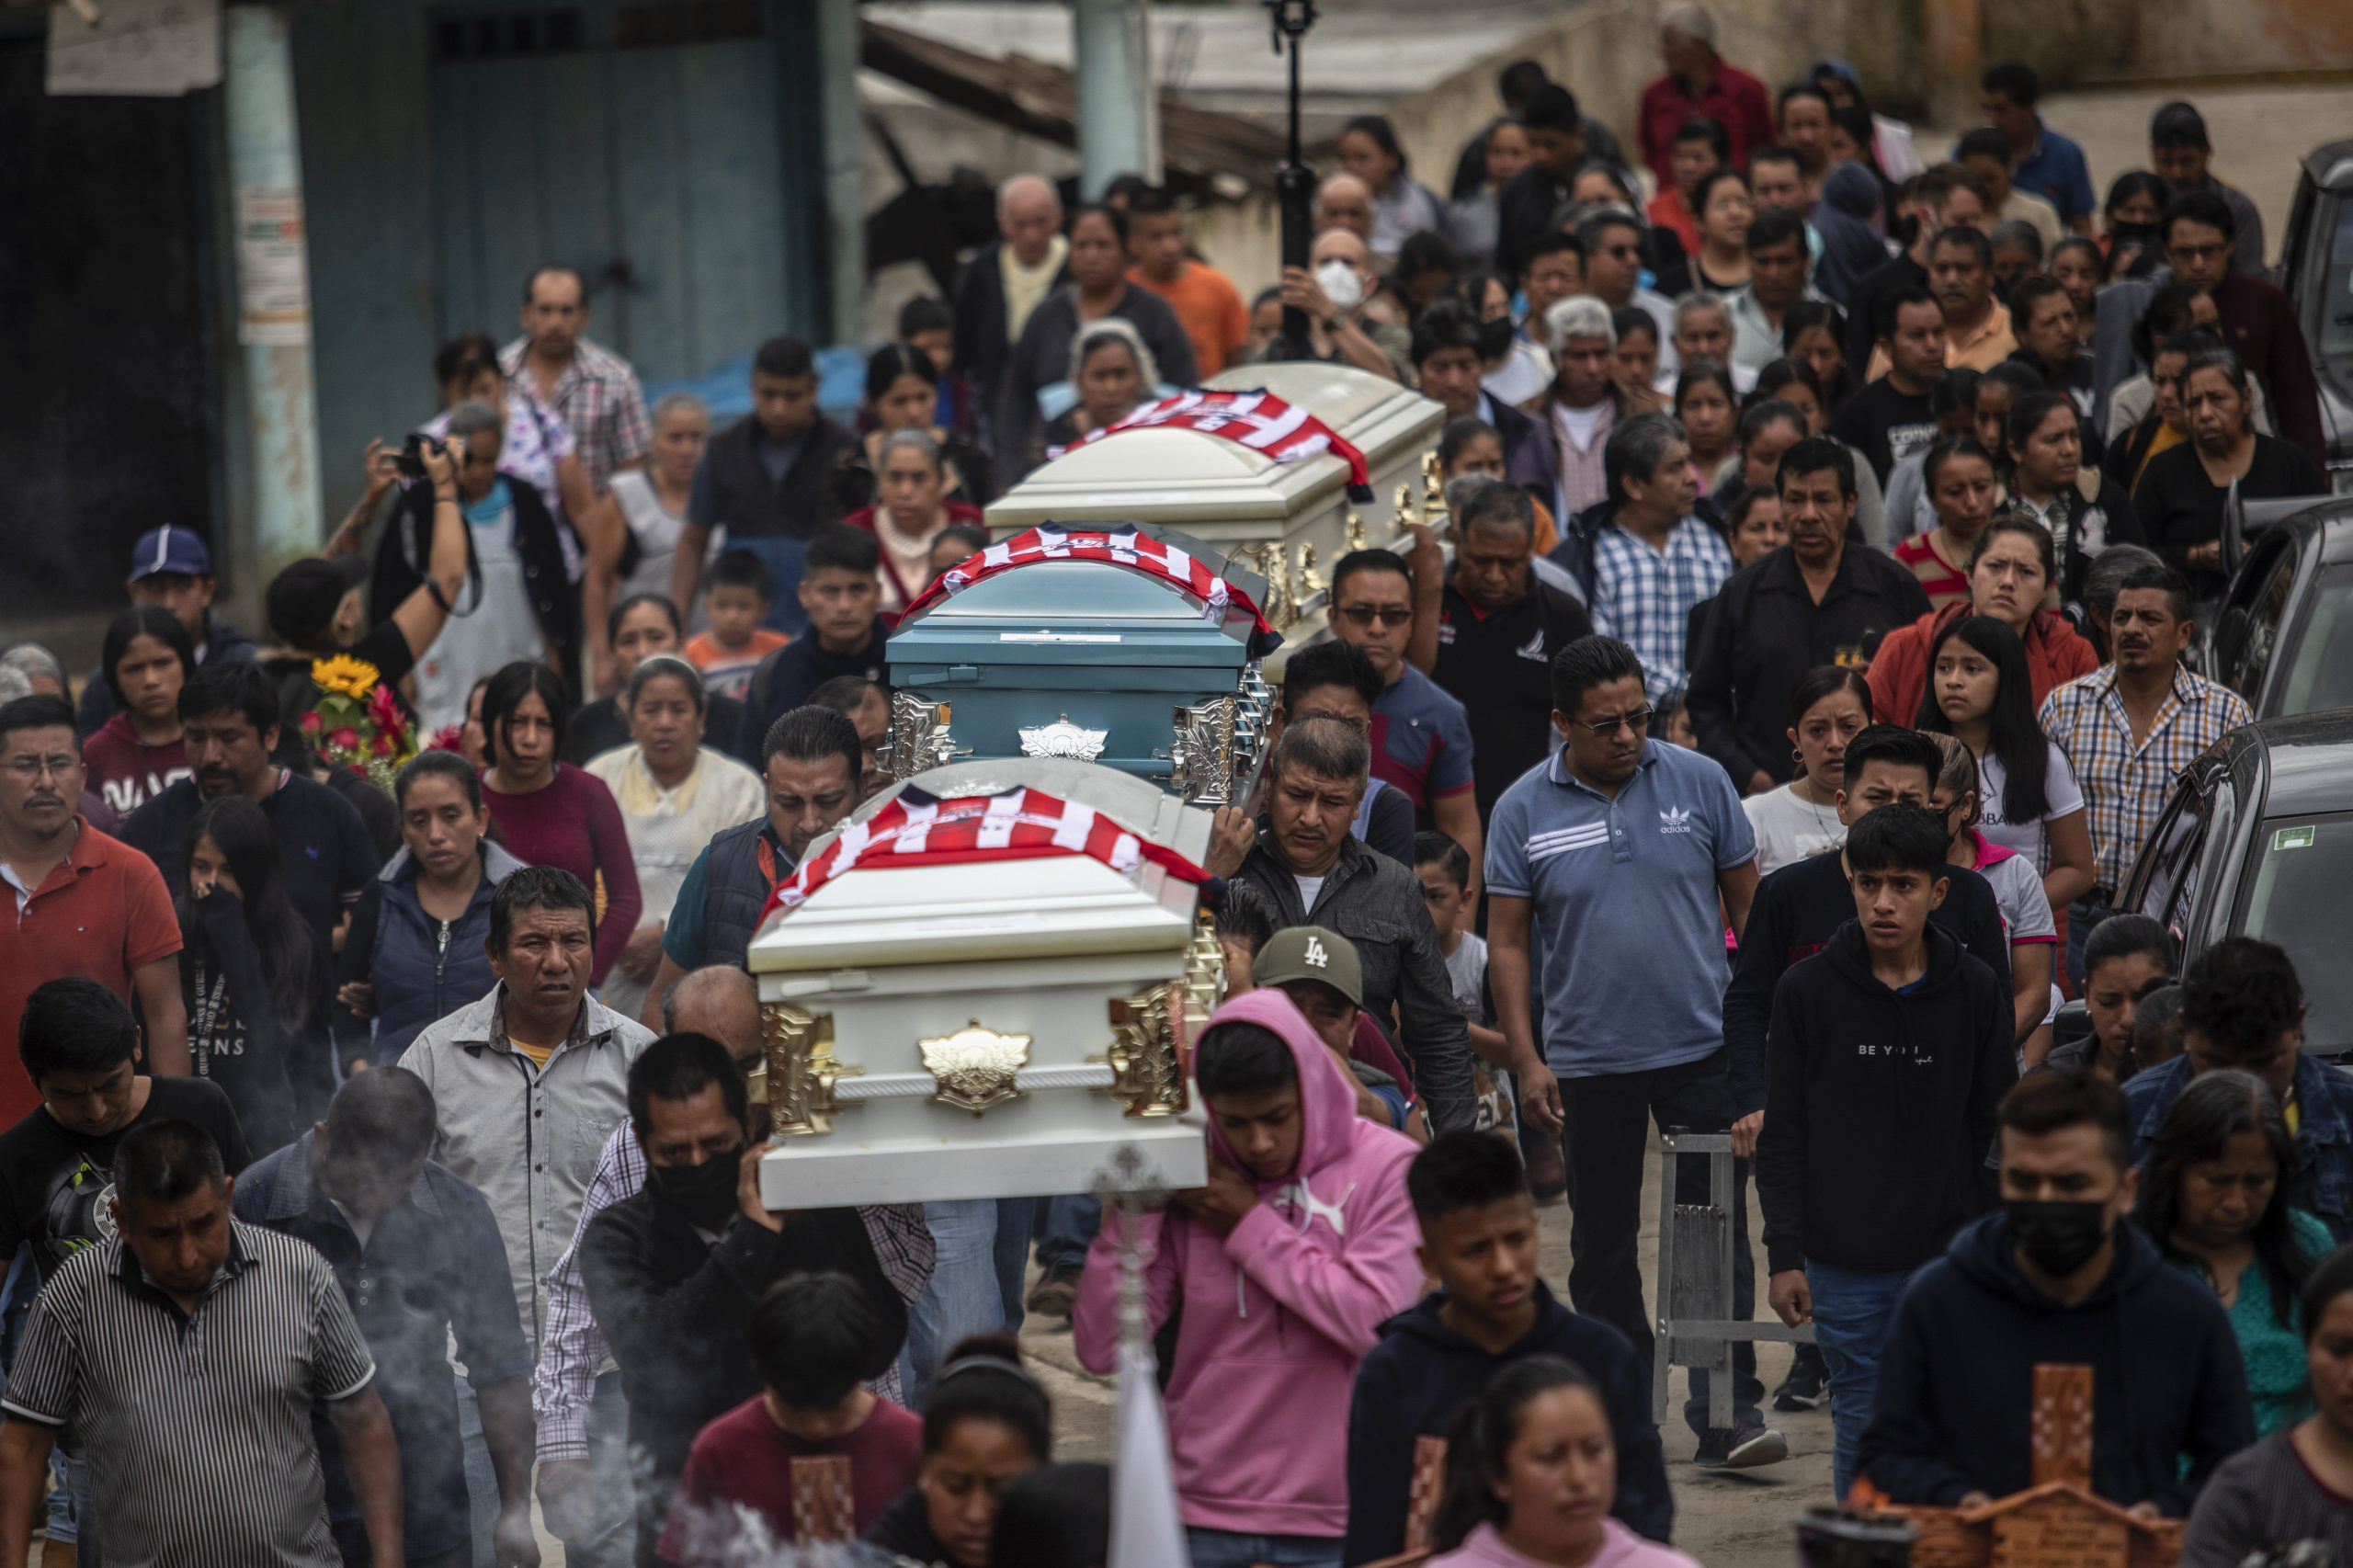 People carry the remains of Jair Valencia, Misael Olivares, and Yovani Valencia for a funeral Mass in San Marcos Atexquilapan, Veracruz state, Mexico. The three teens, all cousins, were those lost among the 53 migrants who died inside a semitrailer in San Antonio.